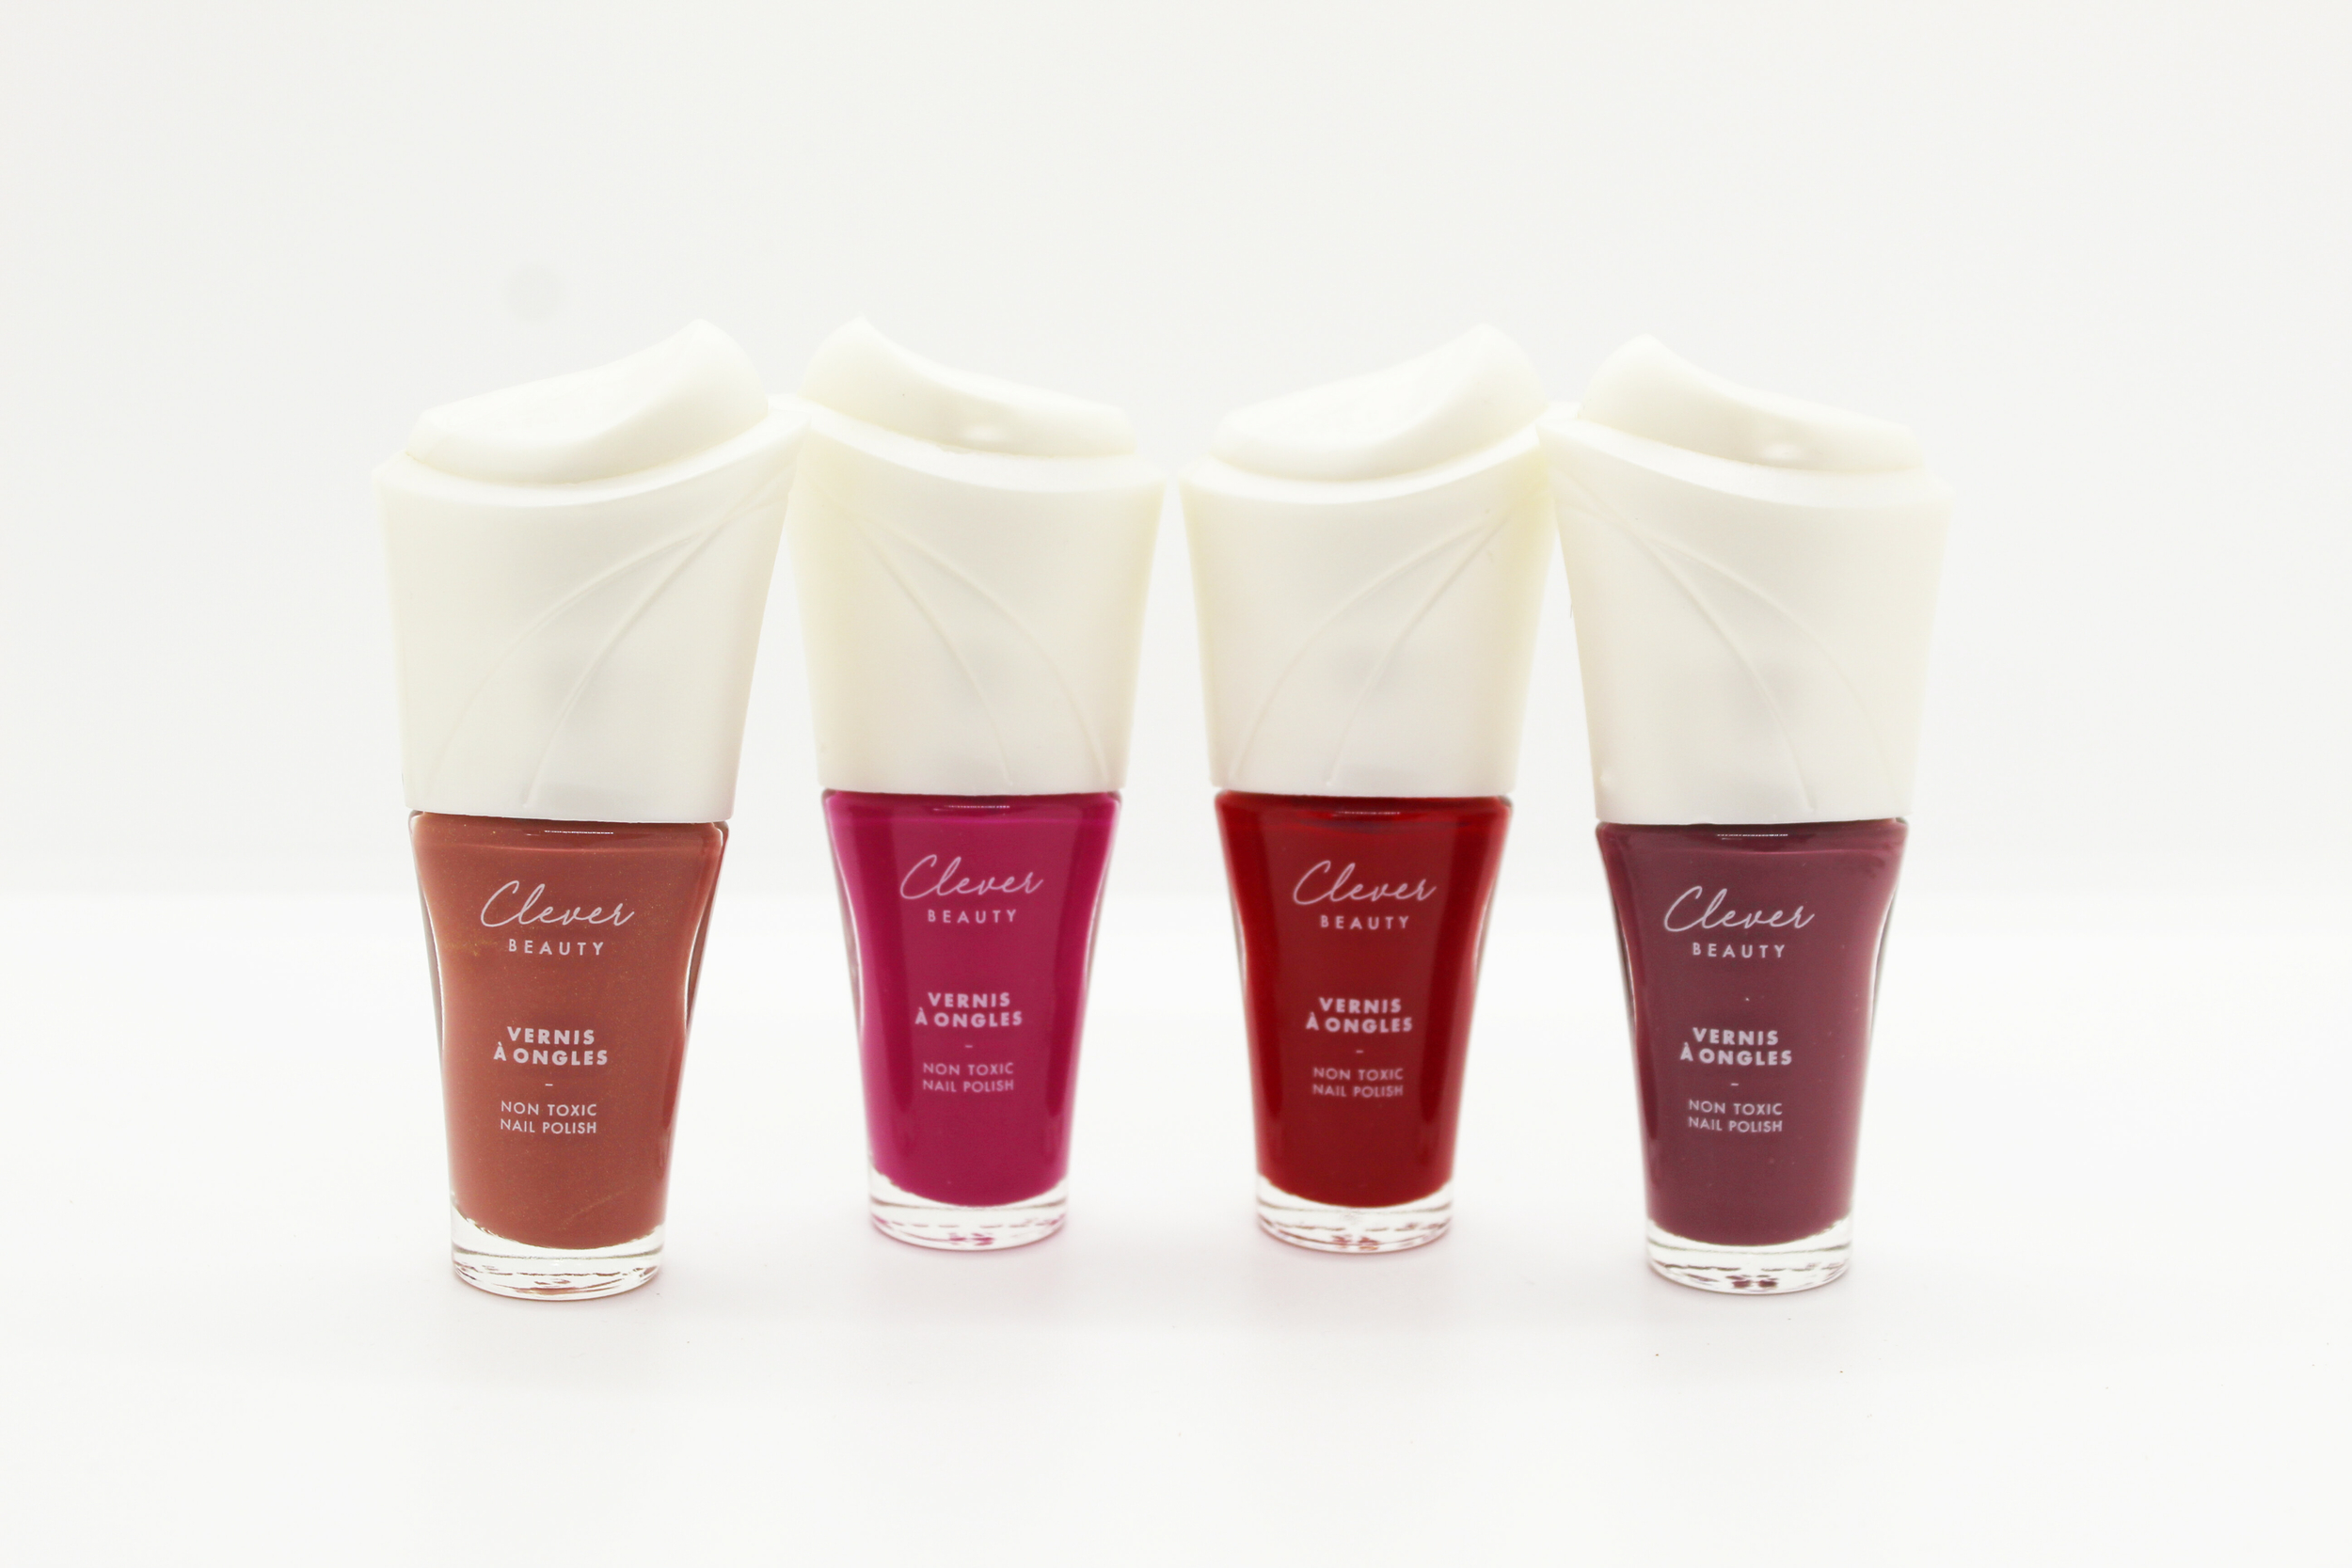 Vernis-clever-beauty-clean-cosmetiques